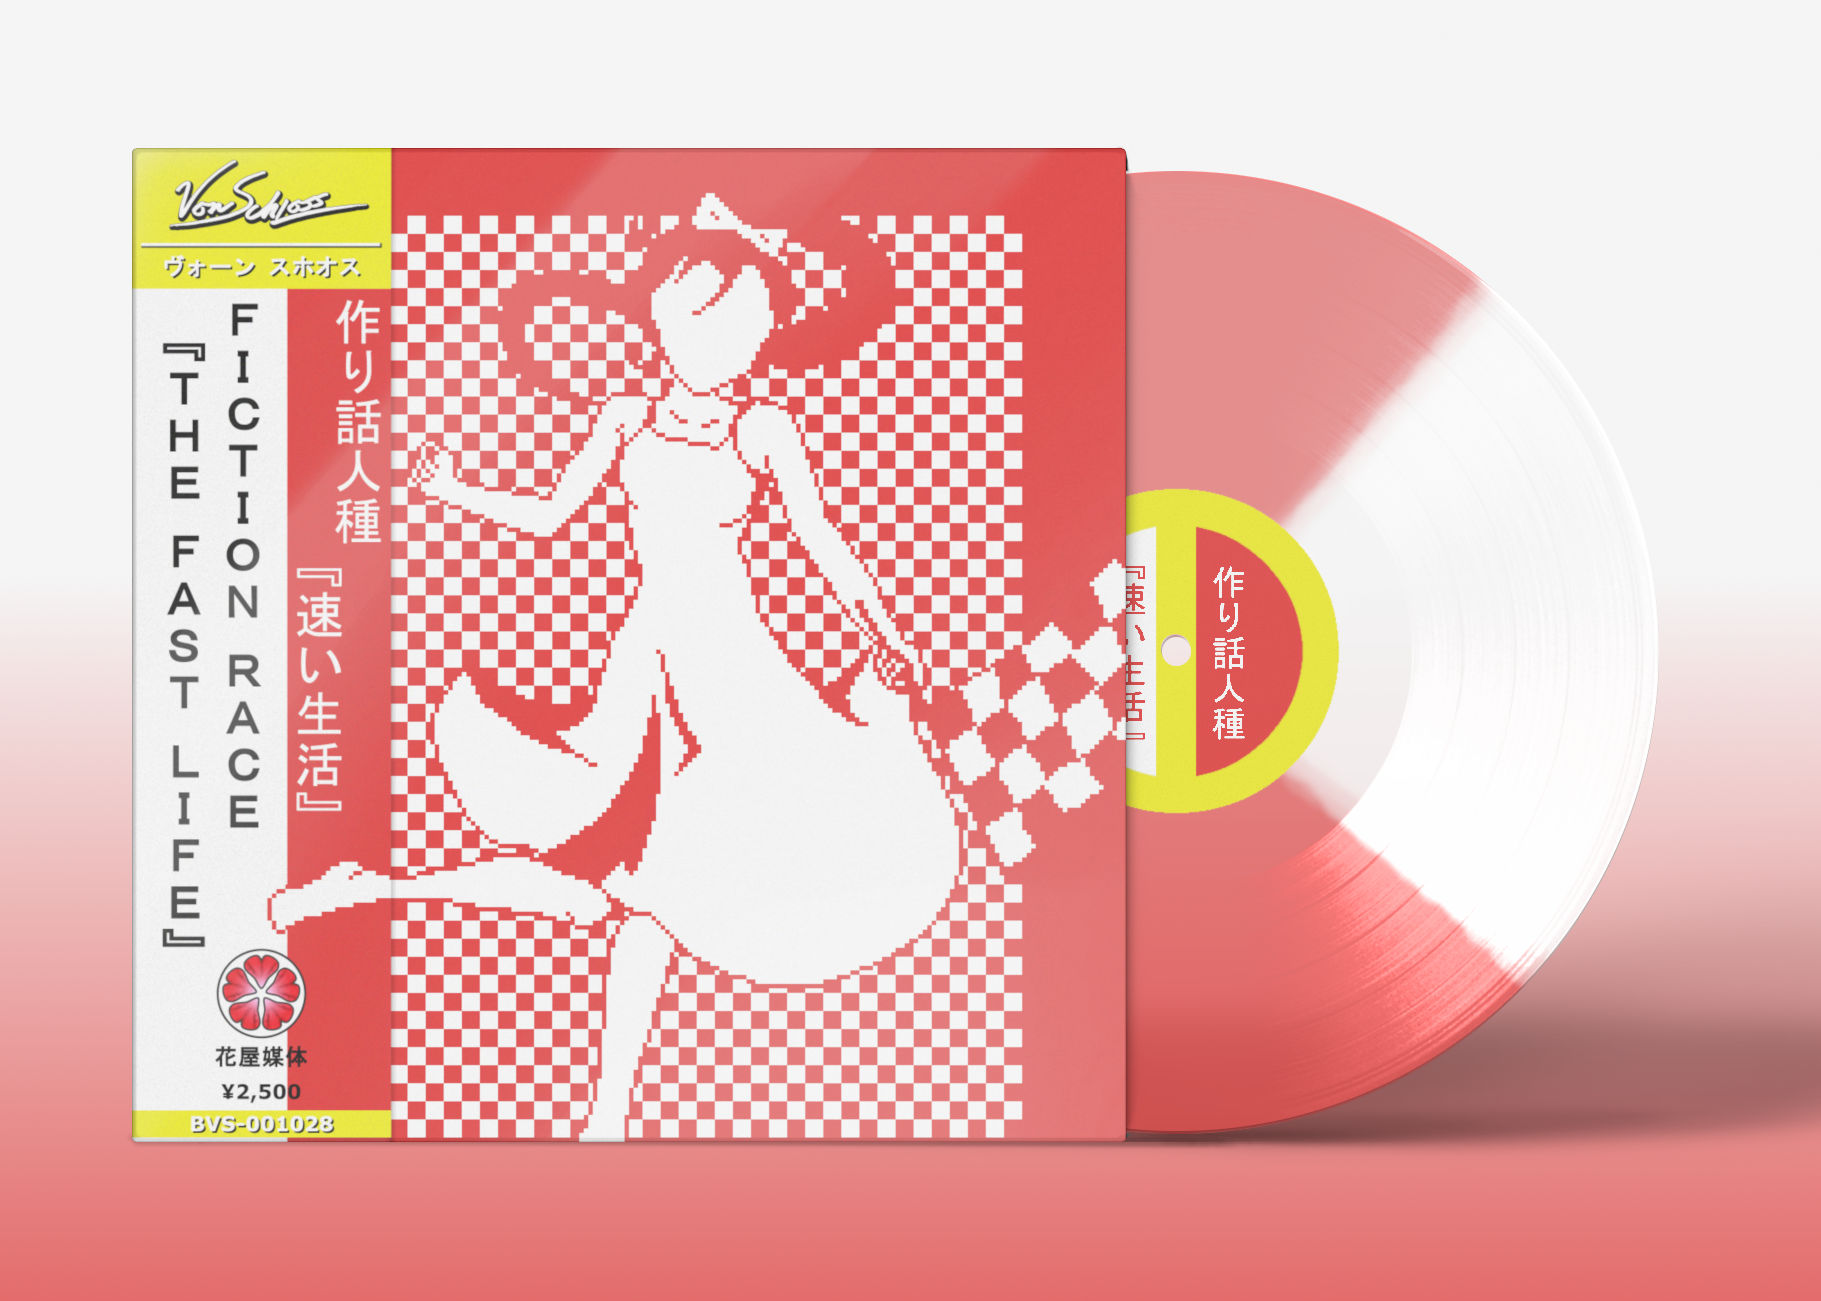 Anime CD/music album art in vaporwave design. Features pixelized women in white on race red background with OBI strip.